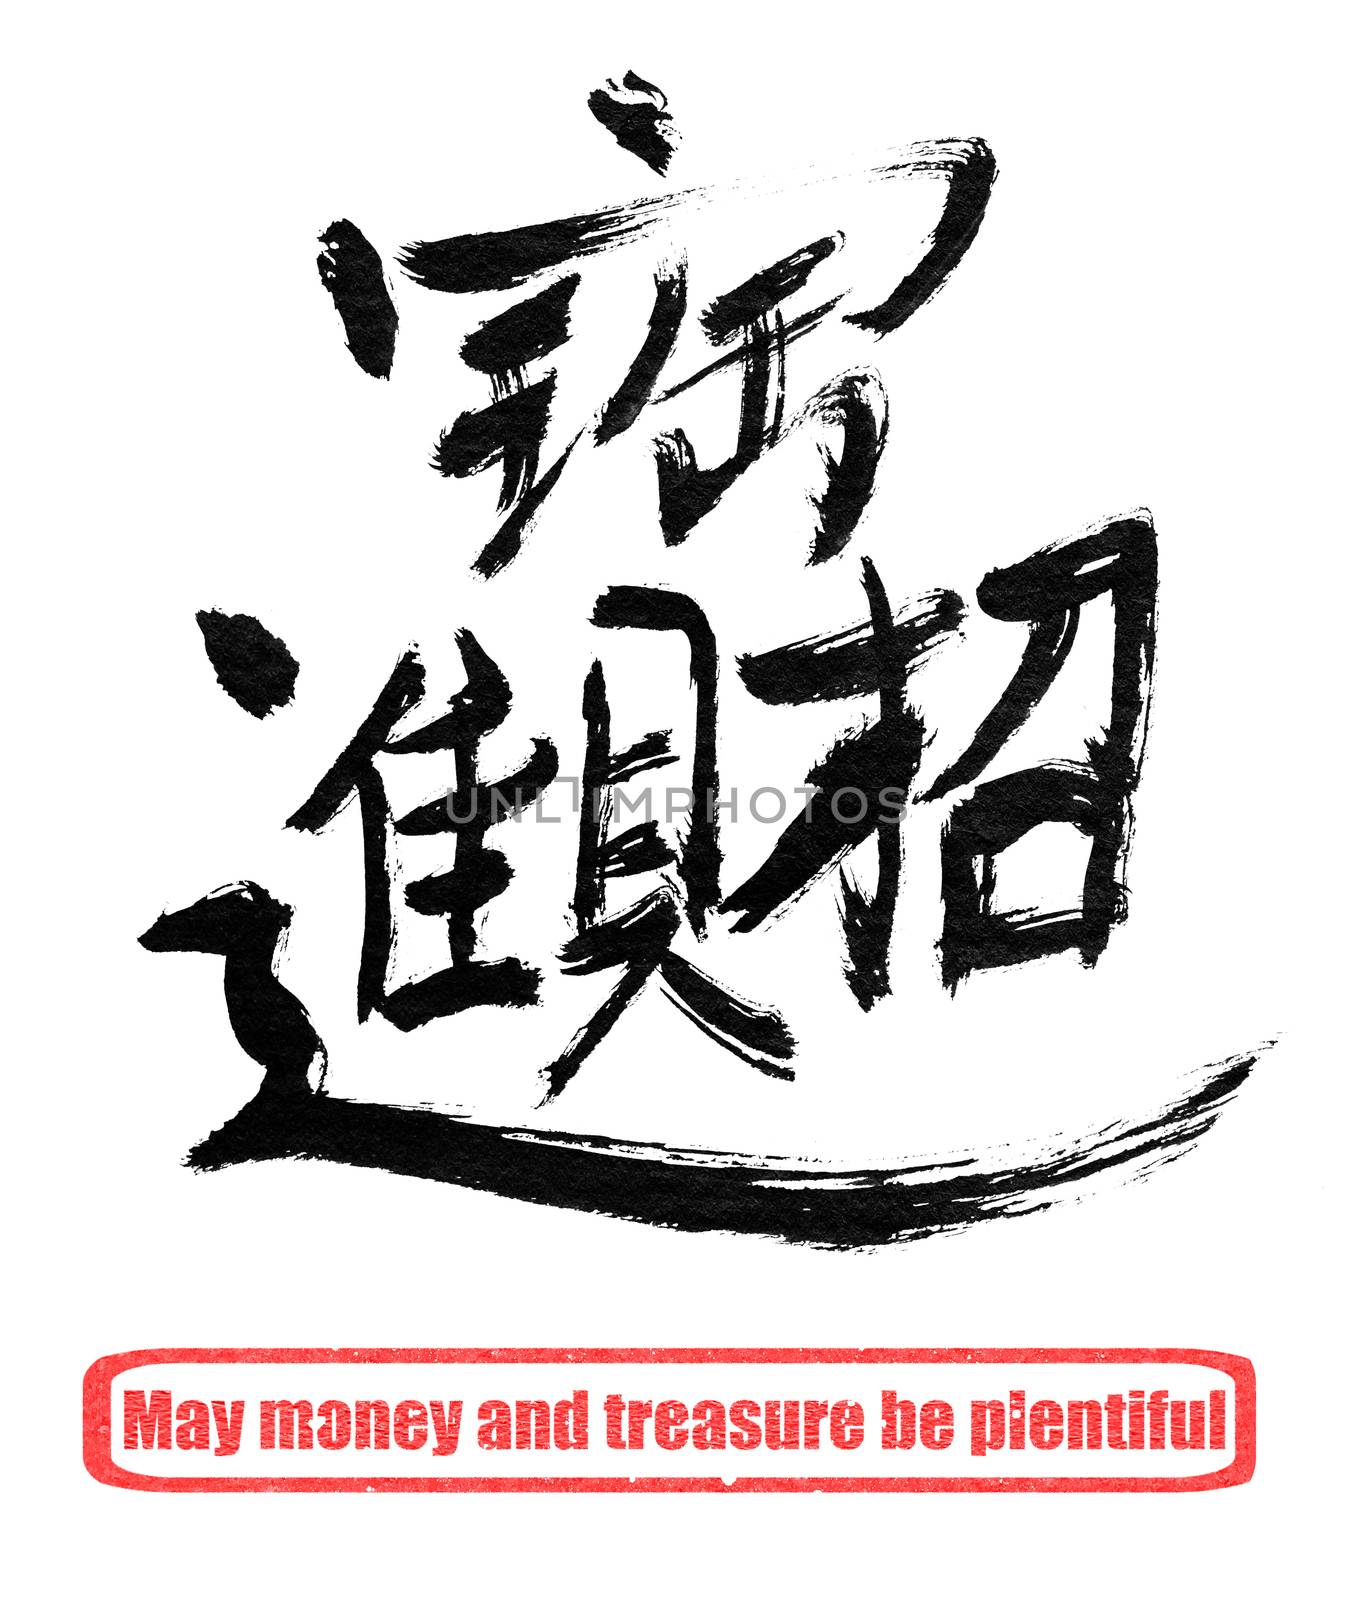 Auspicious words in Chinese, traditional chinese calligraphy art isolated on white background. Meaning is "May the money and treasure be plentiful".